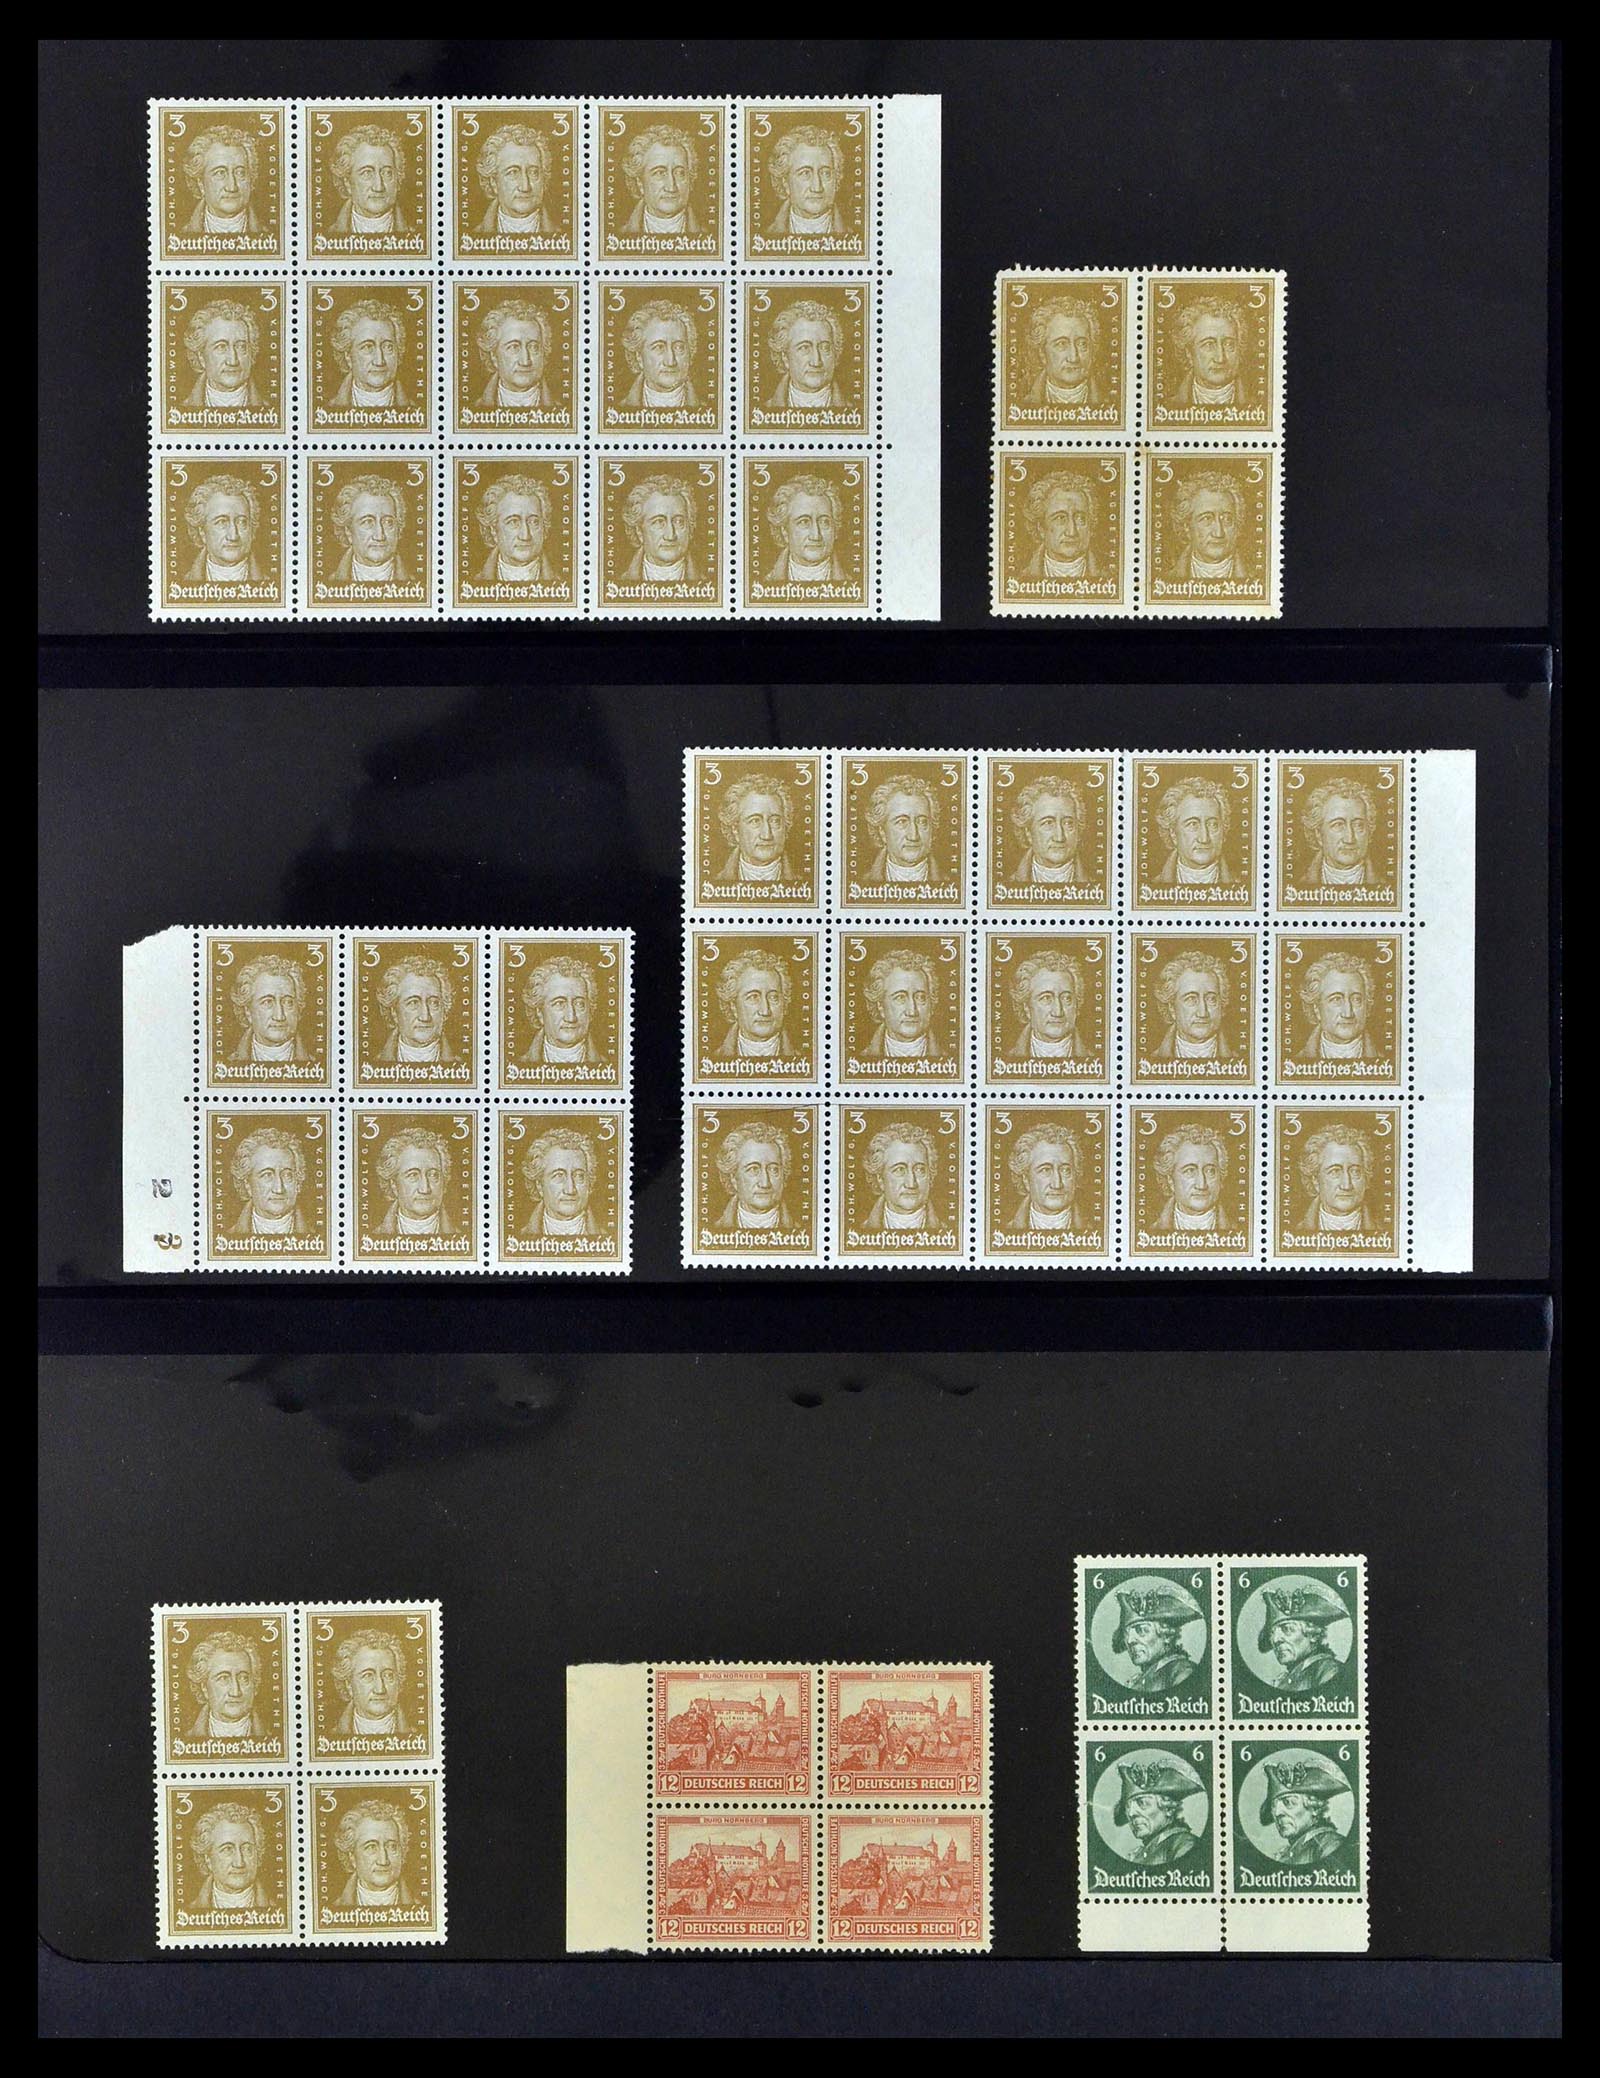 39255 0014 - Stamp collection 39255 German Reich MNH blocks of 4.